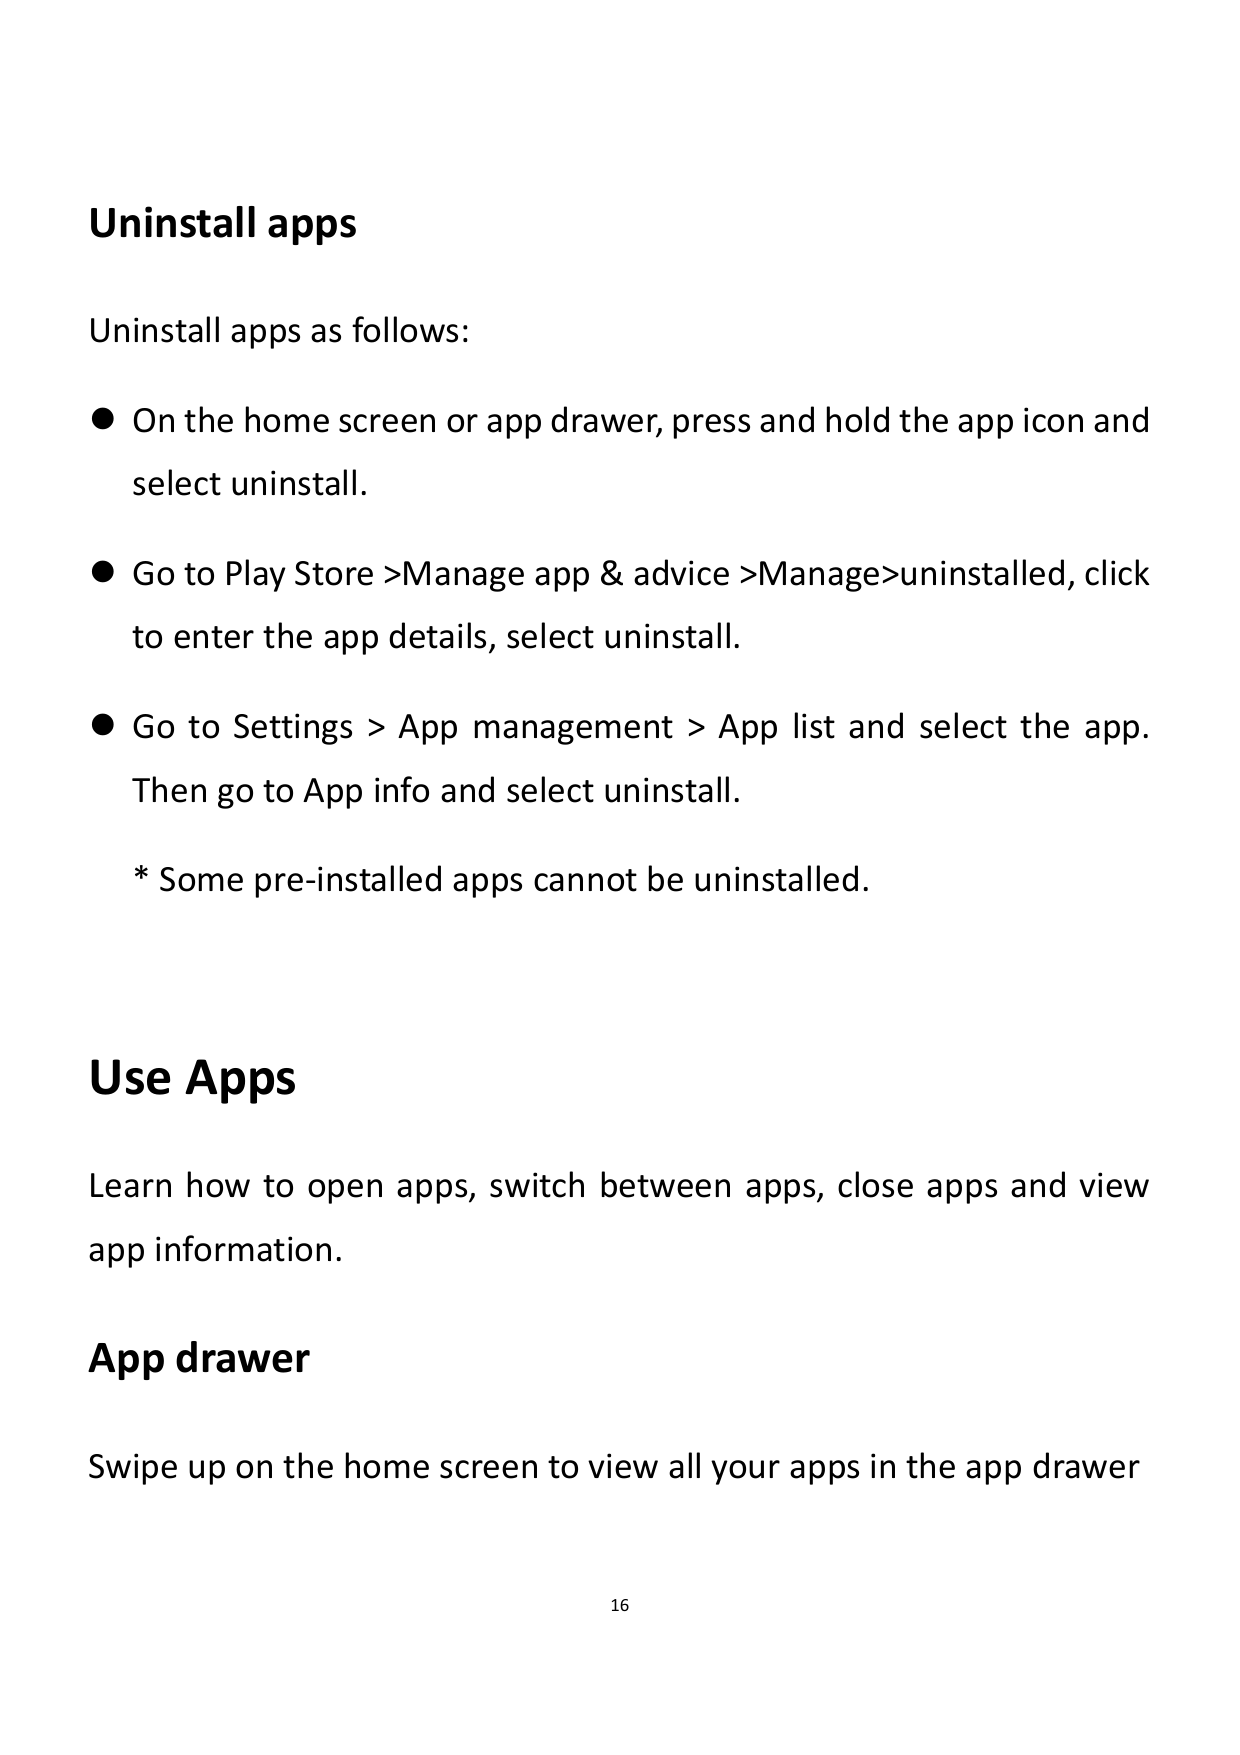 Uninstall appsUninstall apps as follows:⚫ On the home screen or app drawer, press and hold the app icon andselect uninstall.⚫ Go